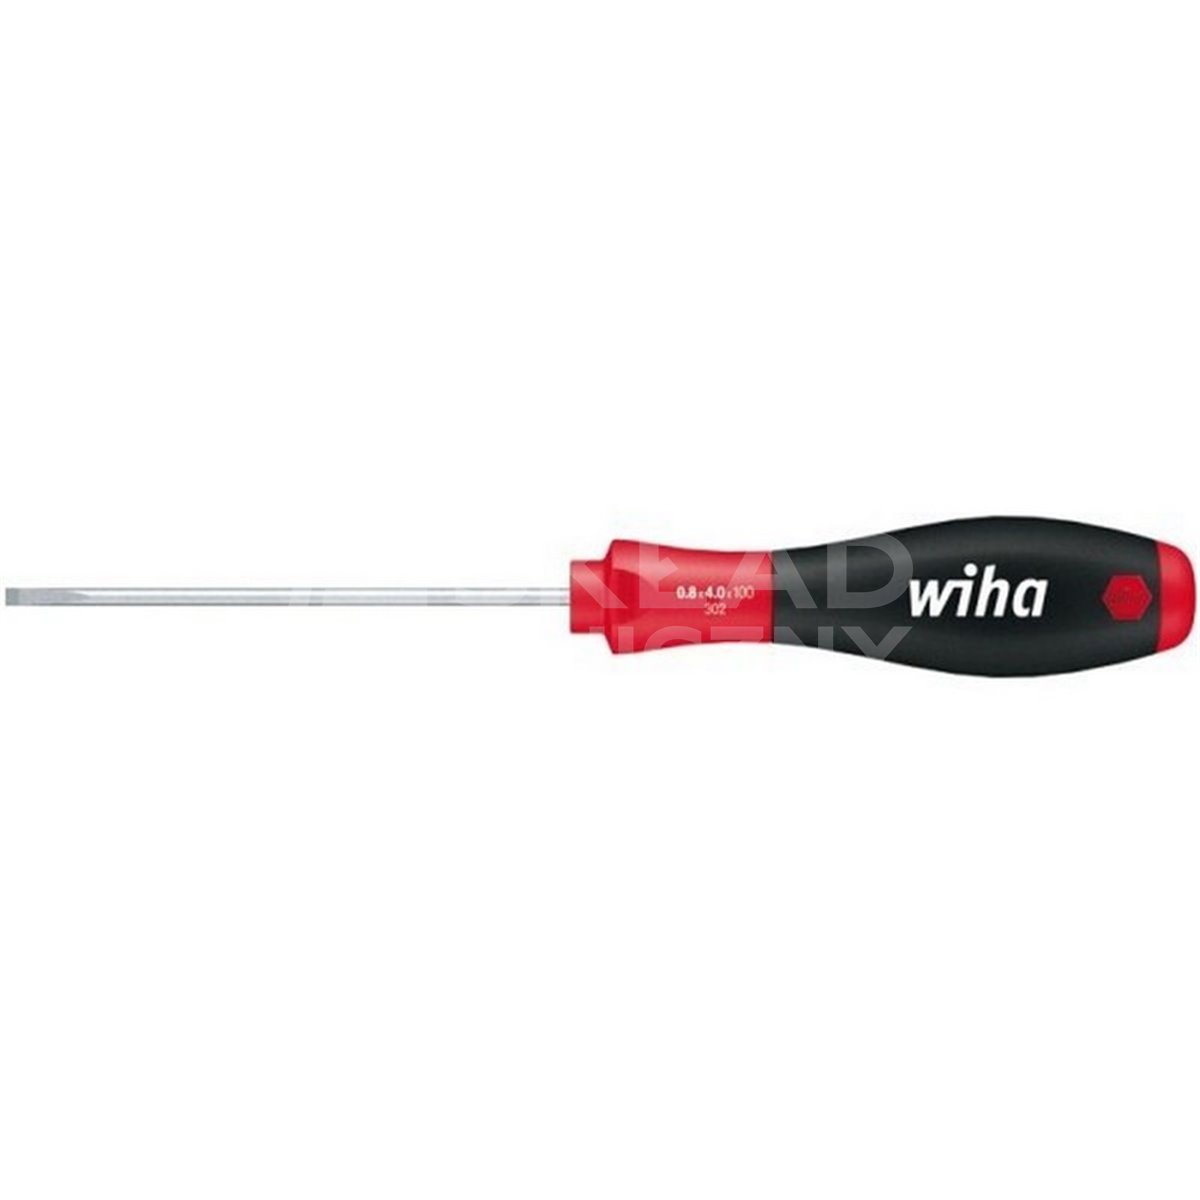 SoftFinish 302 6.0 300mm Flat Screwdriver for Electricians by Wiha 32384.